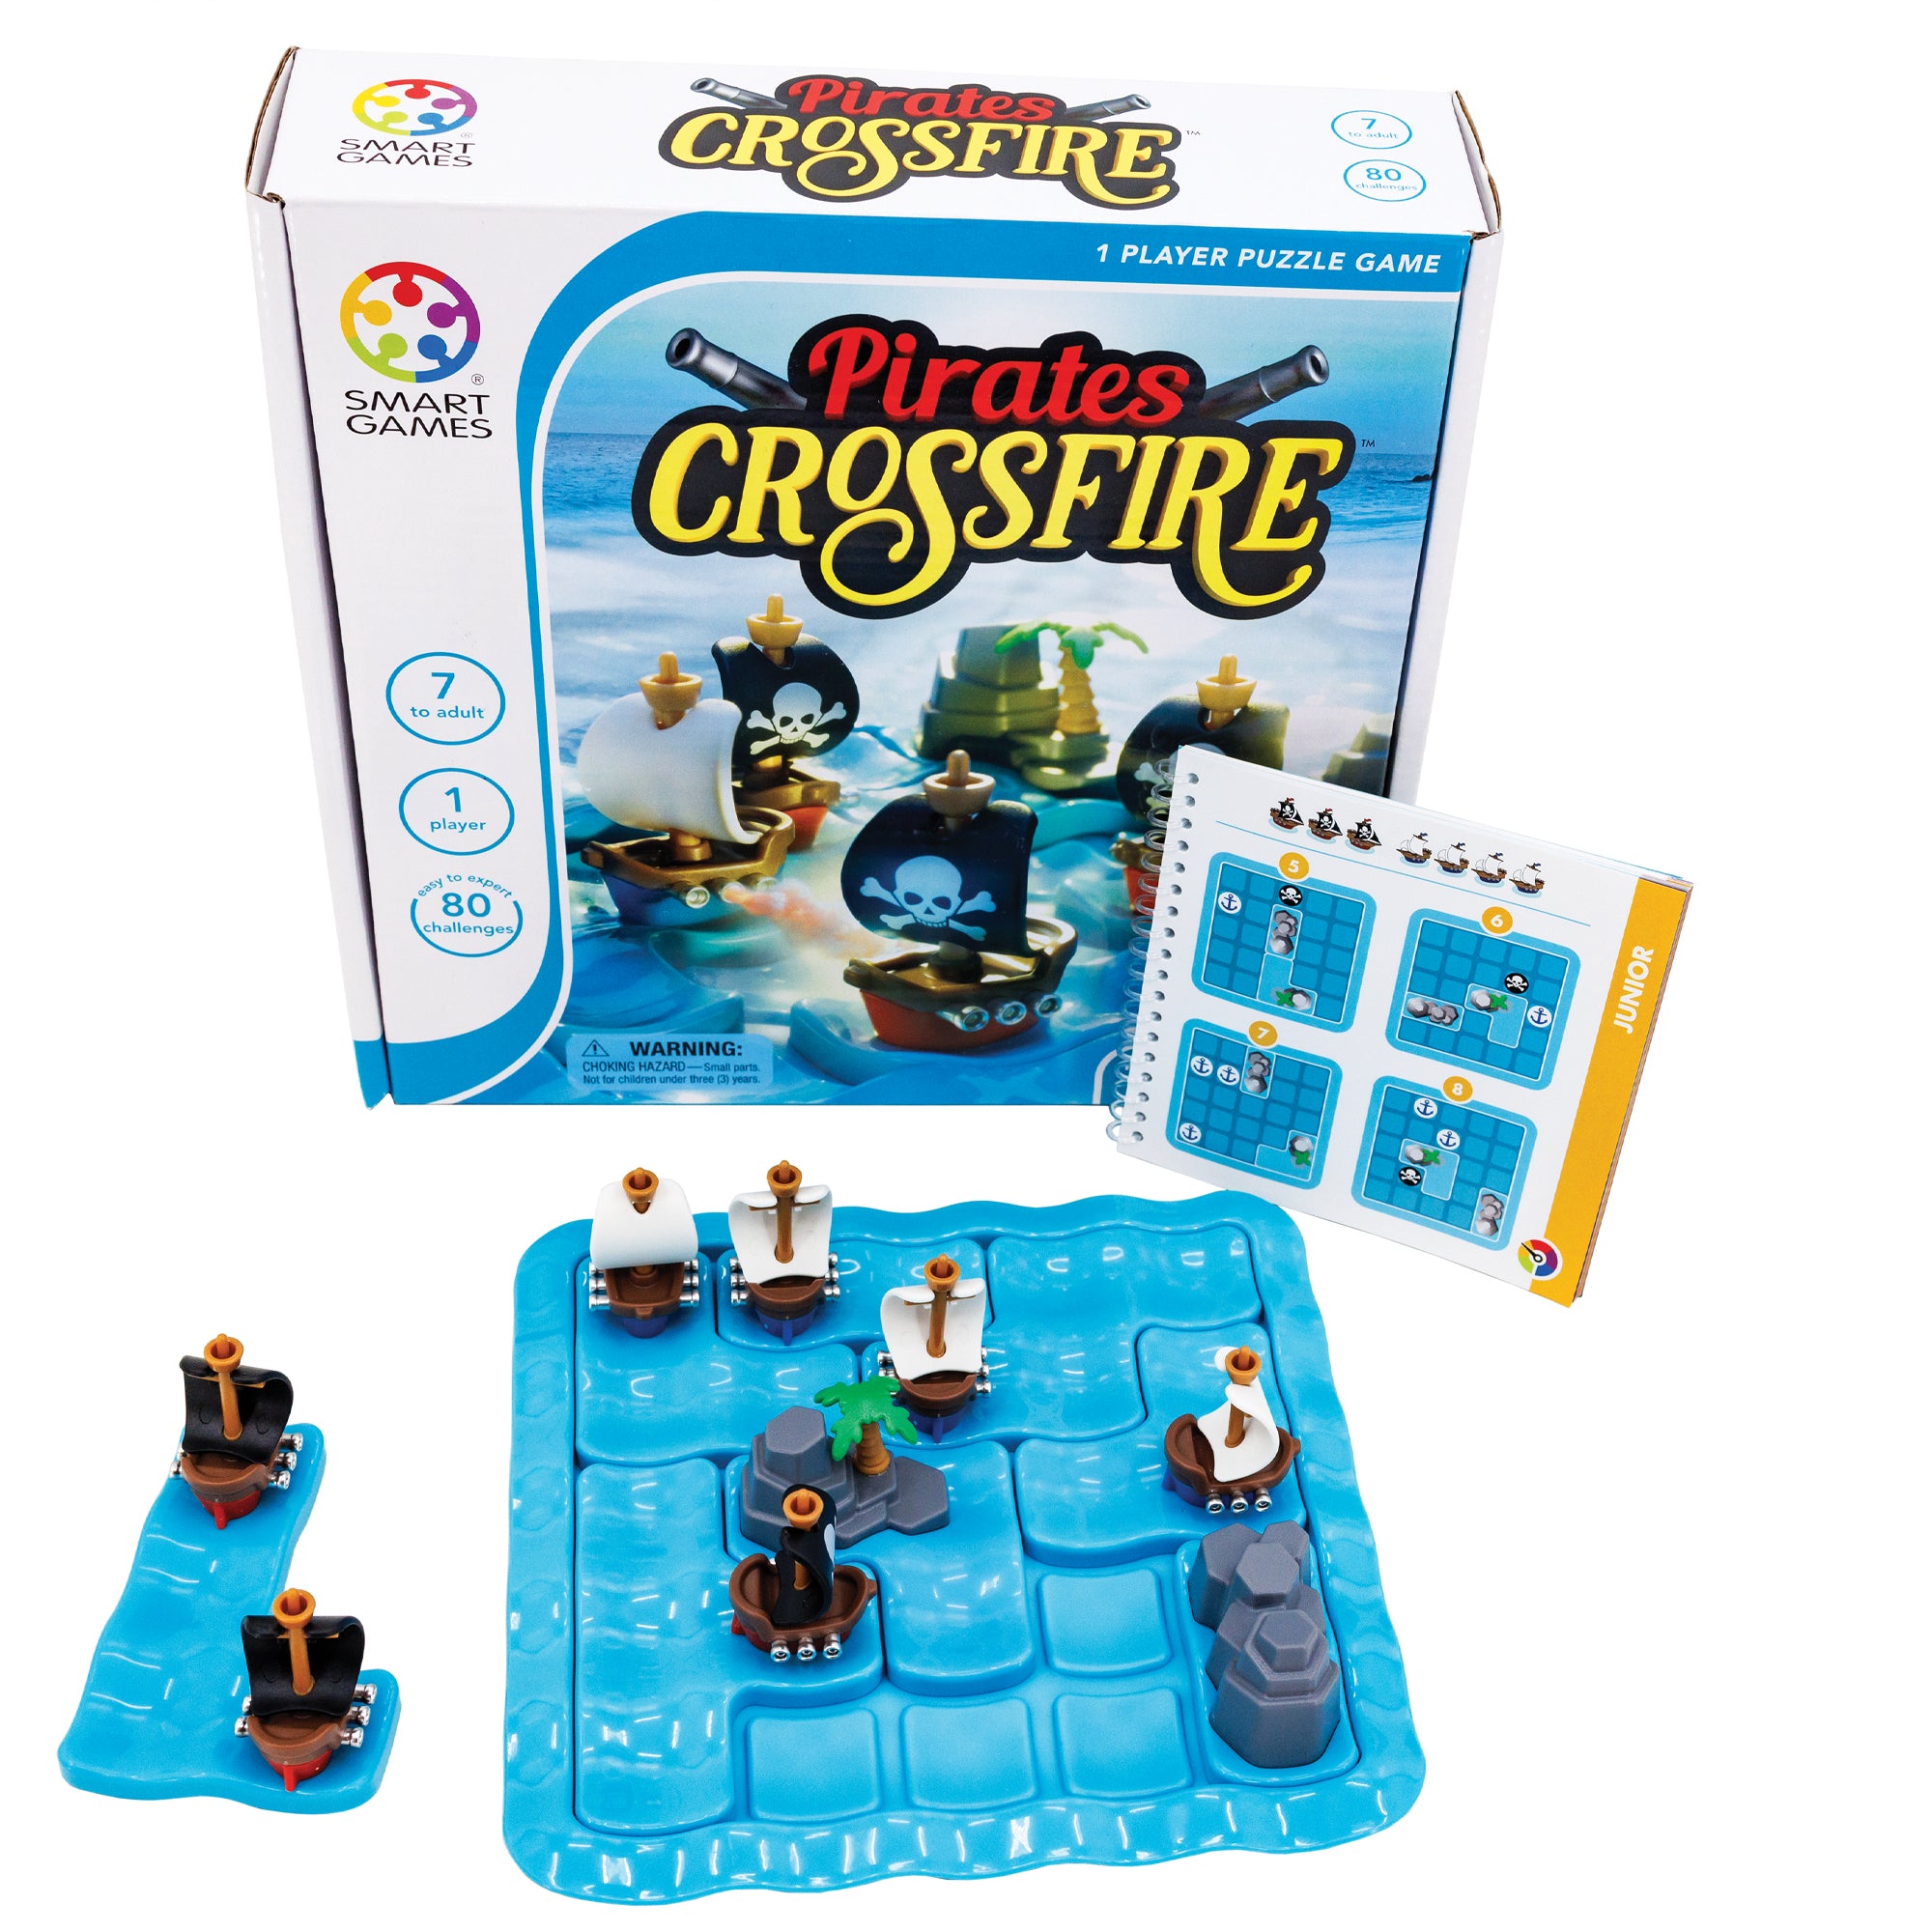 Pirates Crossfire game. The box is standing up with the instruction booklet propped up against it. In front, is the actual game board with pieces in place and one piece off to the side. The game board is blue with ship and rock pieces placed on top. There are 3 black sail ships and 2 white sail ships. The box shows a close up of the game board with pieces on top and an ocean in the background.